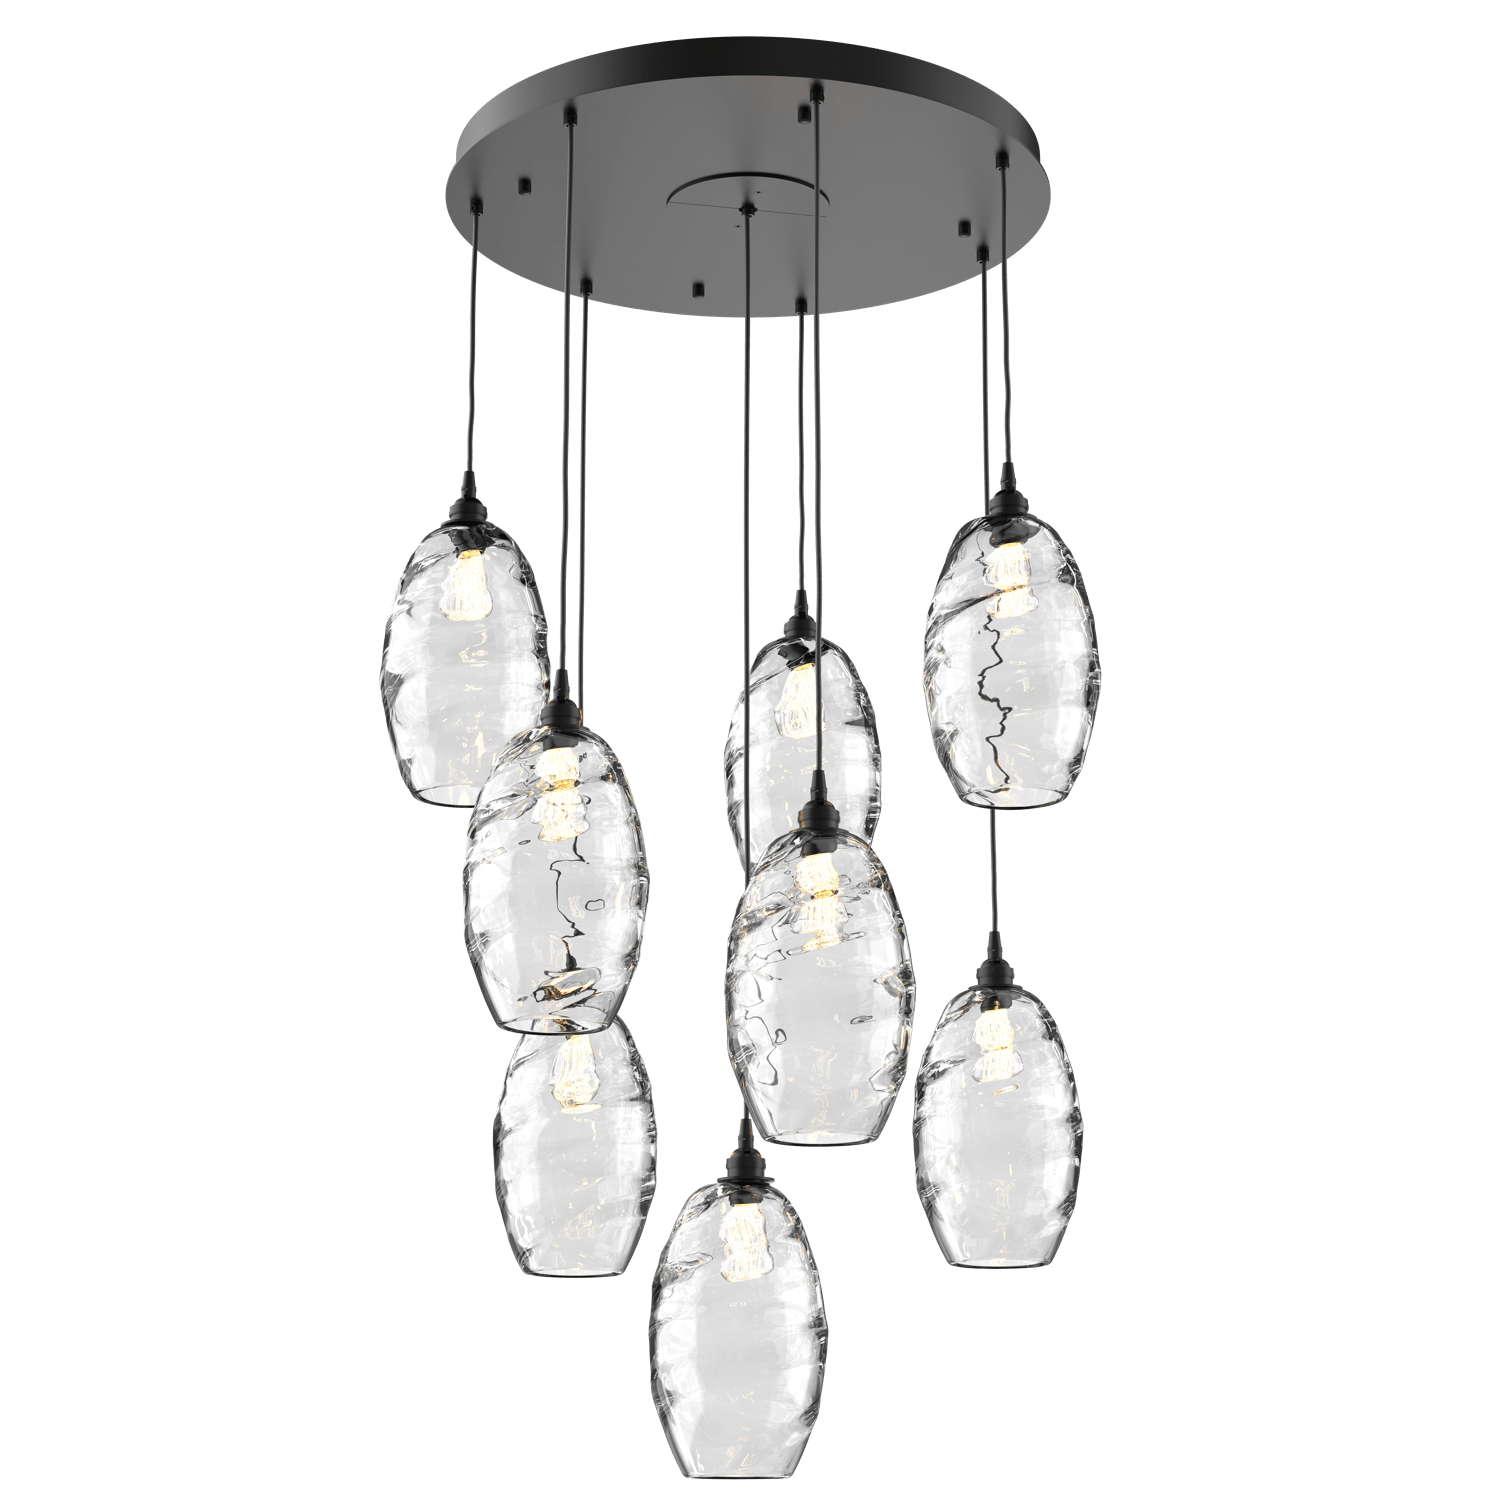 CHB0035-08-MB-OC-Hammerton-Studio-Optic-Blown-Glass-Elisse-8-light-round-pendant-chandelier-with-matte-black-finish-and-optic-clear-blown-glass-shades-and-incandescent-lamping